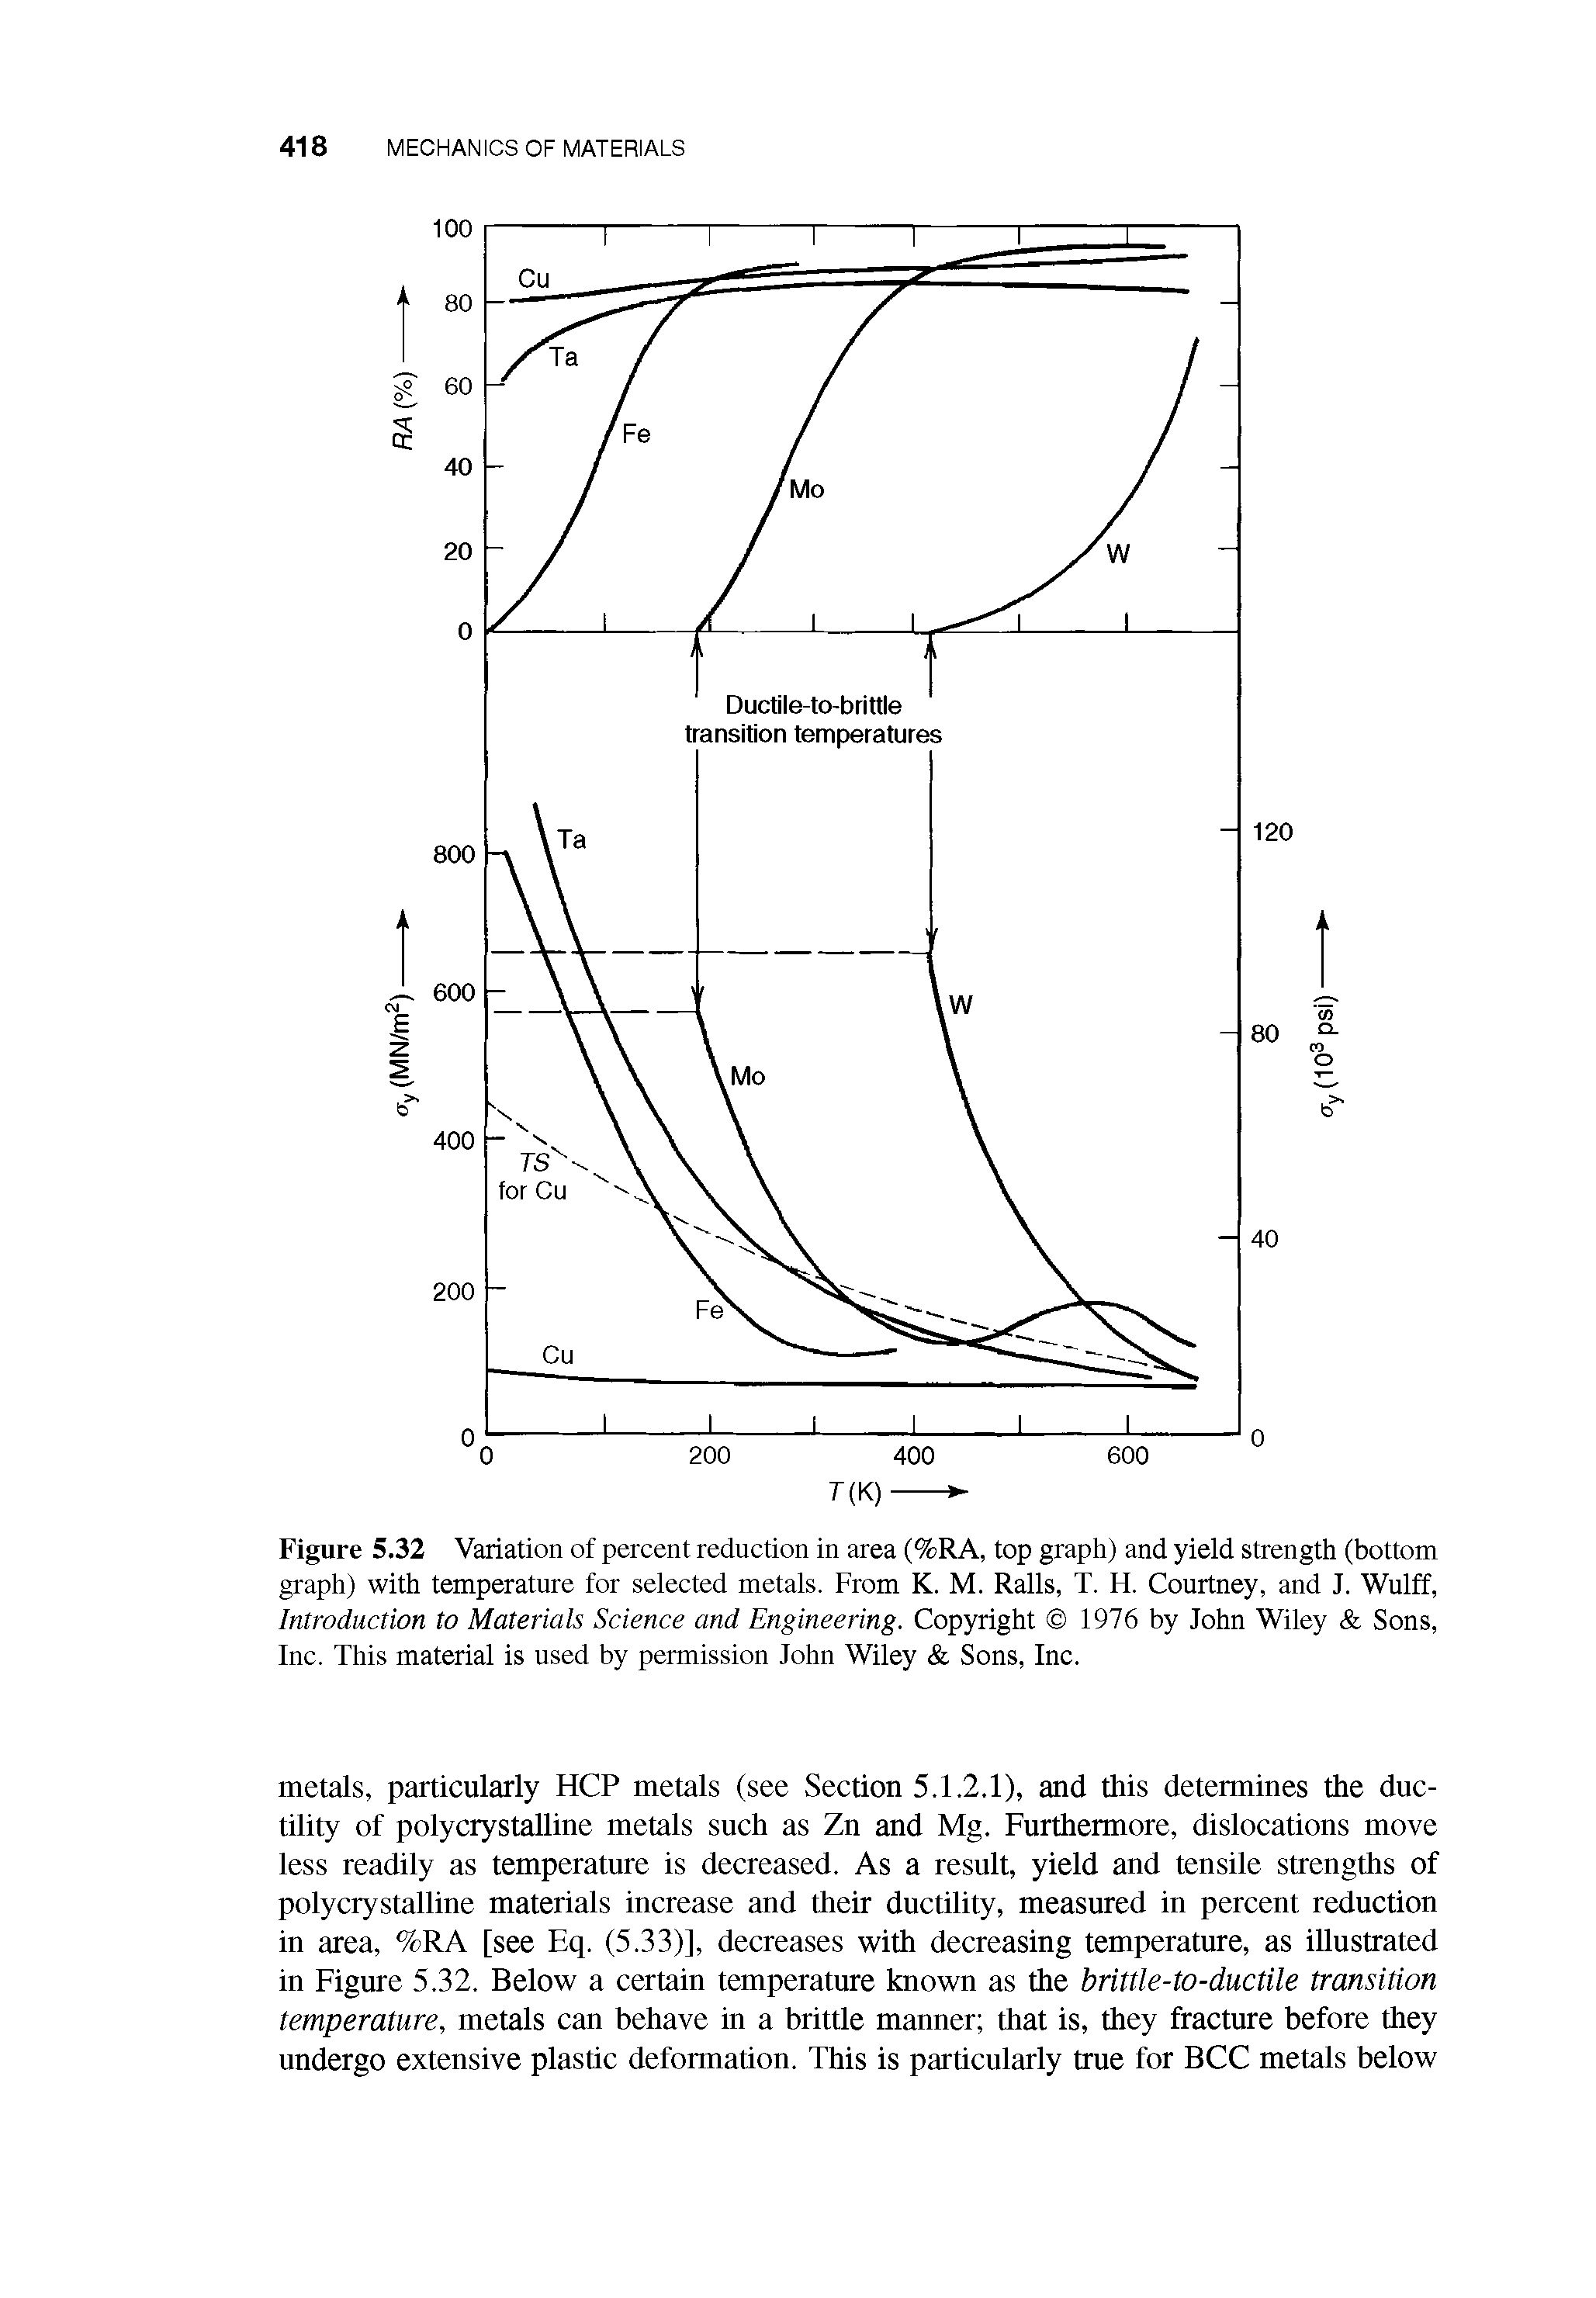 Figure 5.32 Variation of percent reduction in area (%RA, top graph) and yield strength (bottom graph) with temperature for selected metals. From K. M. Ralls, T. H. Courtney, and J. Wulff, Introduction to Materials Science and Engineering. Copyright 1976 by John Wiley Sons, Inc. This material is used by permission John Wiley Sons, Inc.